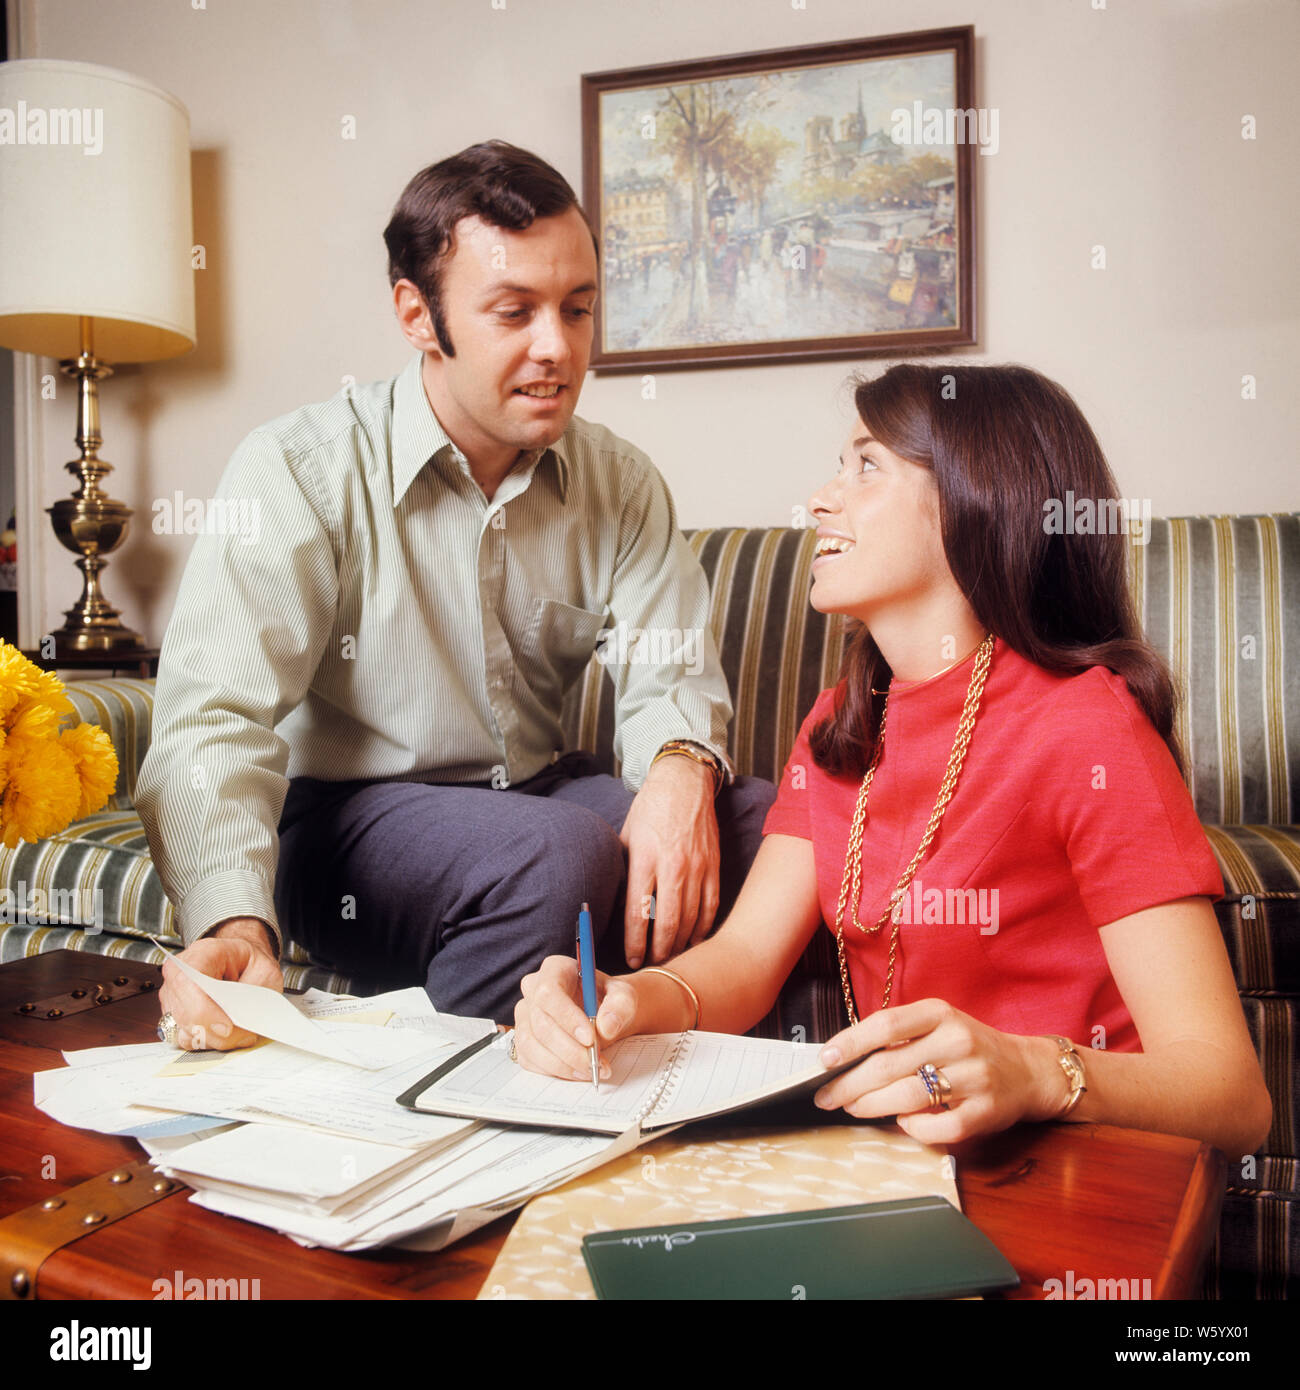 1970s SMILING COUPLE MAN WOMAN HUSBAND WIFE SITTING ON STRIPED COUCH REVIEWING FINANCES AND BILLS BALANCING CHECKBOOK CALENDAR  - ks7703 HAR001 HARS NOSTALGIA OLD FASHION FACIAL BUDGET COUCH STYLE COMMUNICATION TEAMWORK INFORMATION MYSTERY PLEASED JOY LIFESTYLE SATISFACTION FEMALES STRIPED MARRIED SPOUSE HUSBANDS HOME LIFE FINANCES COPY SPACE FRIENDSHIP HALF-LENGTH LADIES PERSONS MALES PLANNING CONFIDENCE PAYING EXPRESSIONS BALANCING PARTNER GOALS SUCCESS DREAMS HAPPINESS HEAD AND SHOULDERS CHEERFUL CHORE VICTORY STRATEGY AND LOW ANGLE PROGRESS CHECKBOOK ON FACIAL HAIR FEELING SMILES Stock Photo